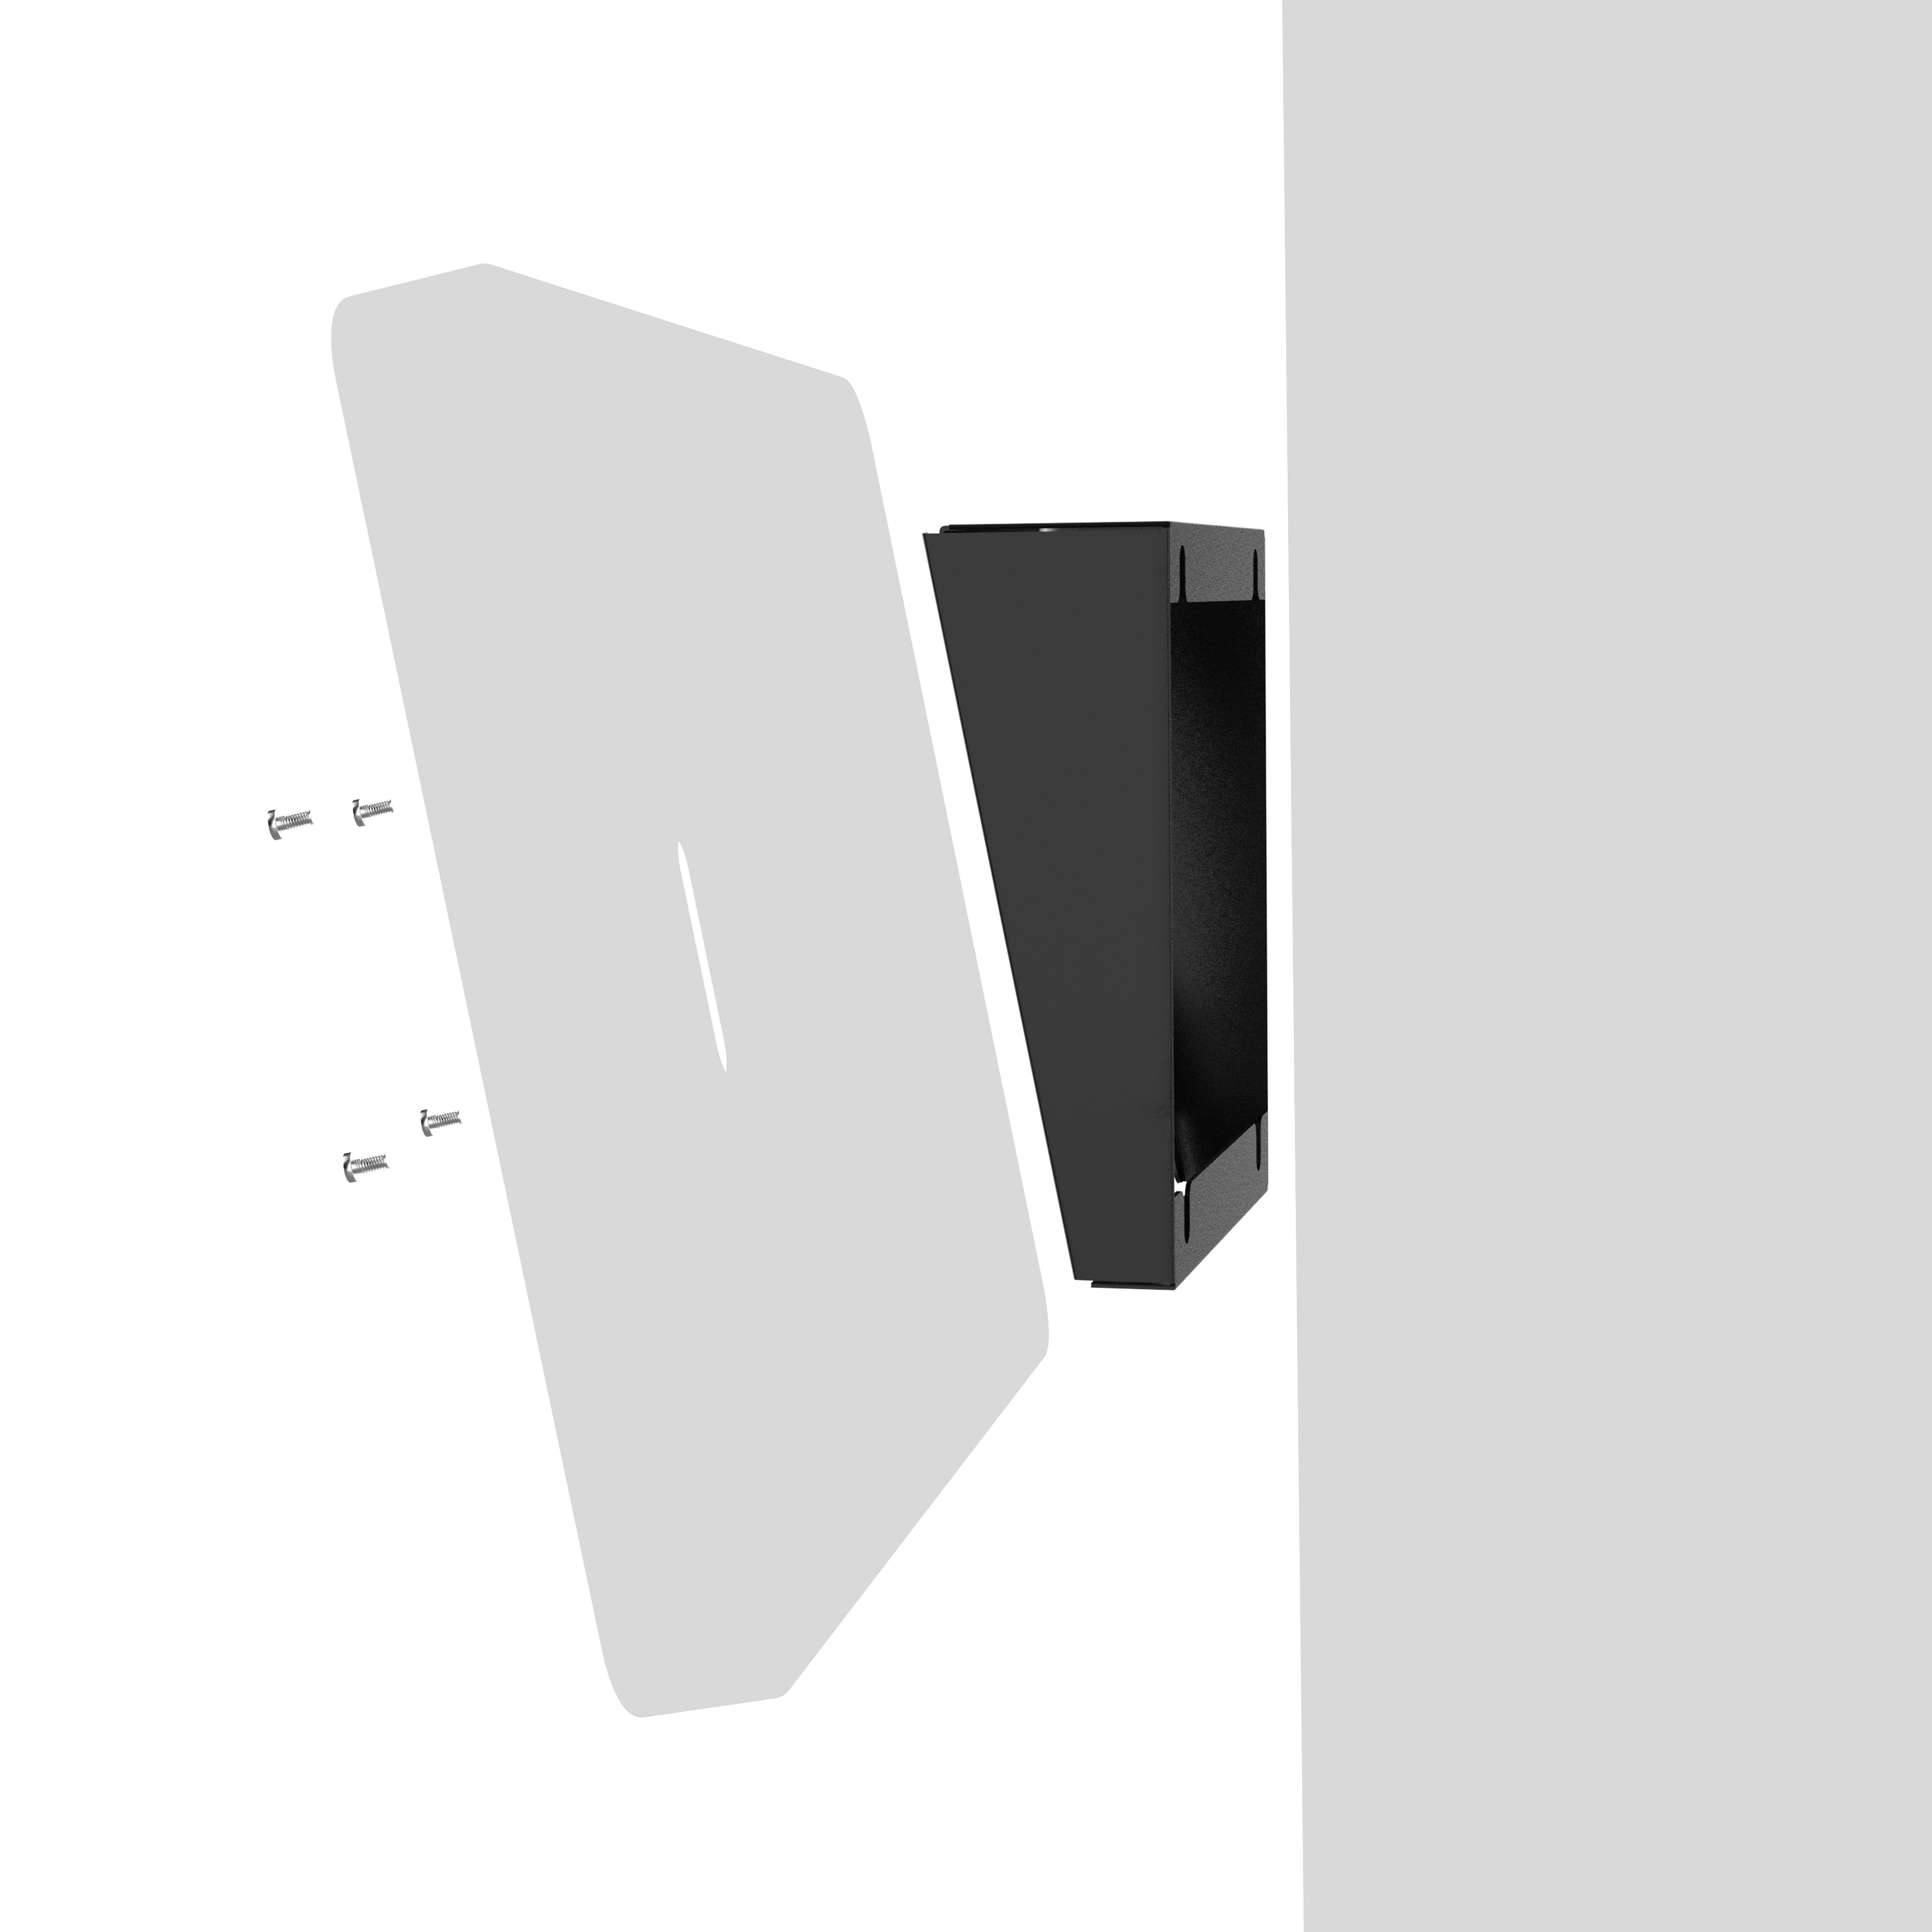 Premium VESA Wedge and Outlet / PoE Cover Add-On for Tablets